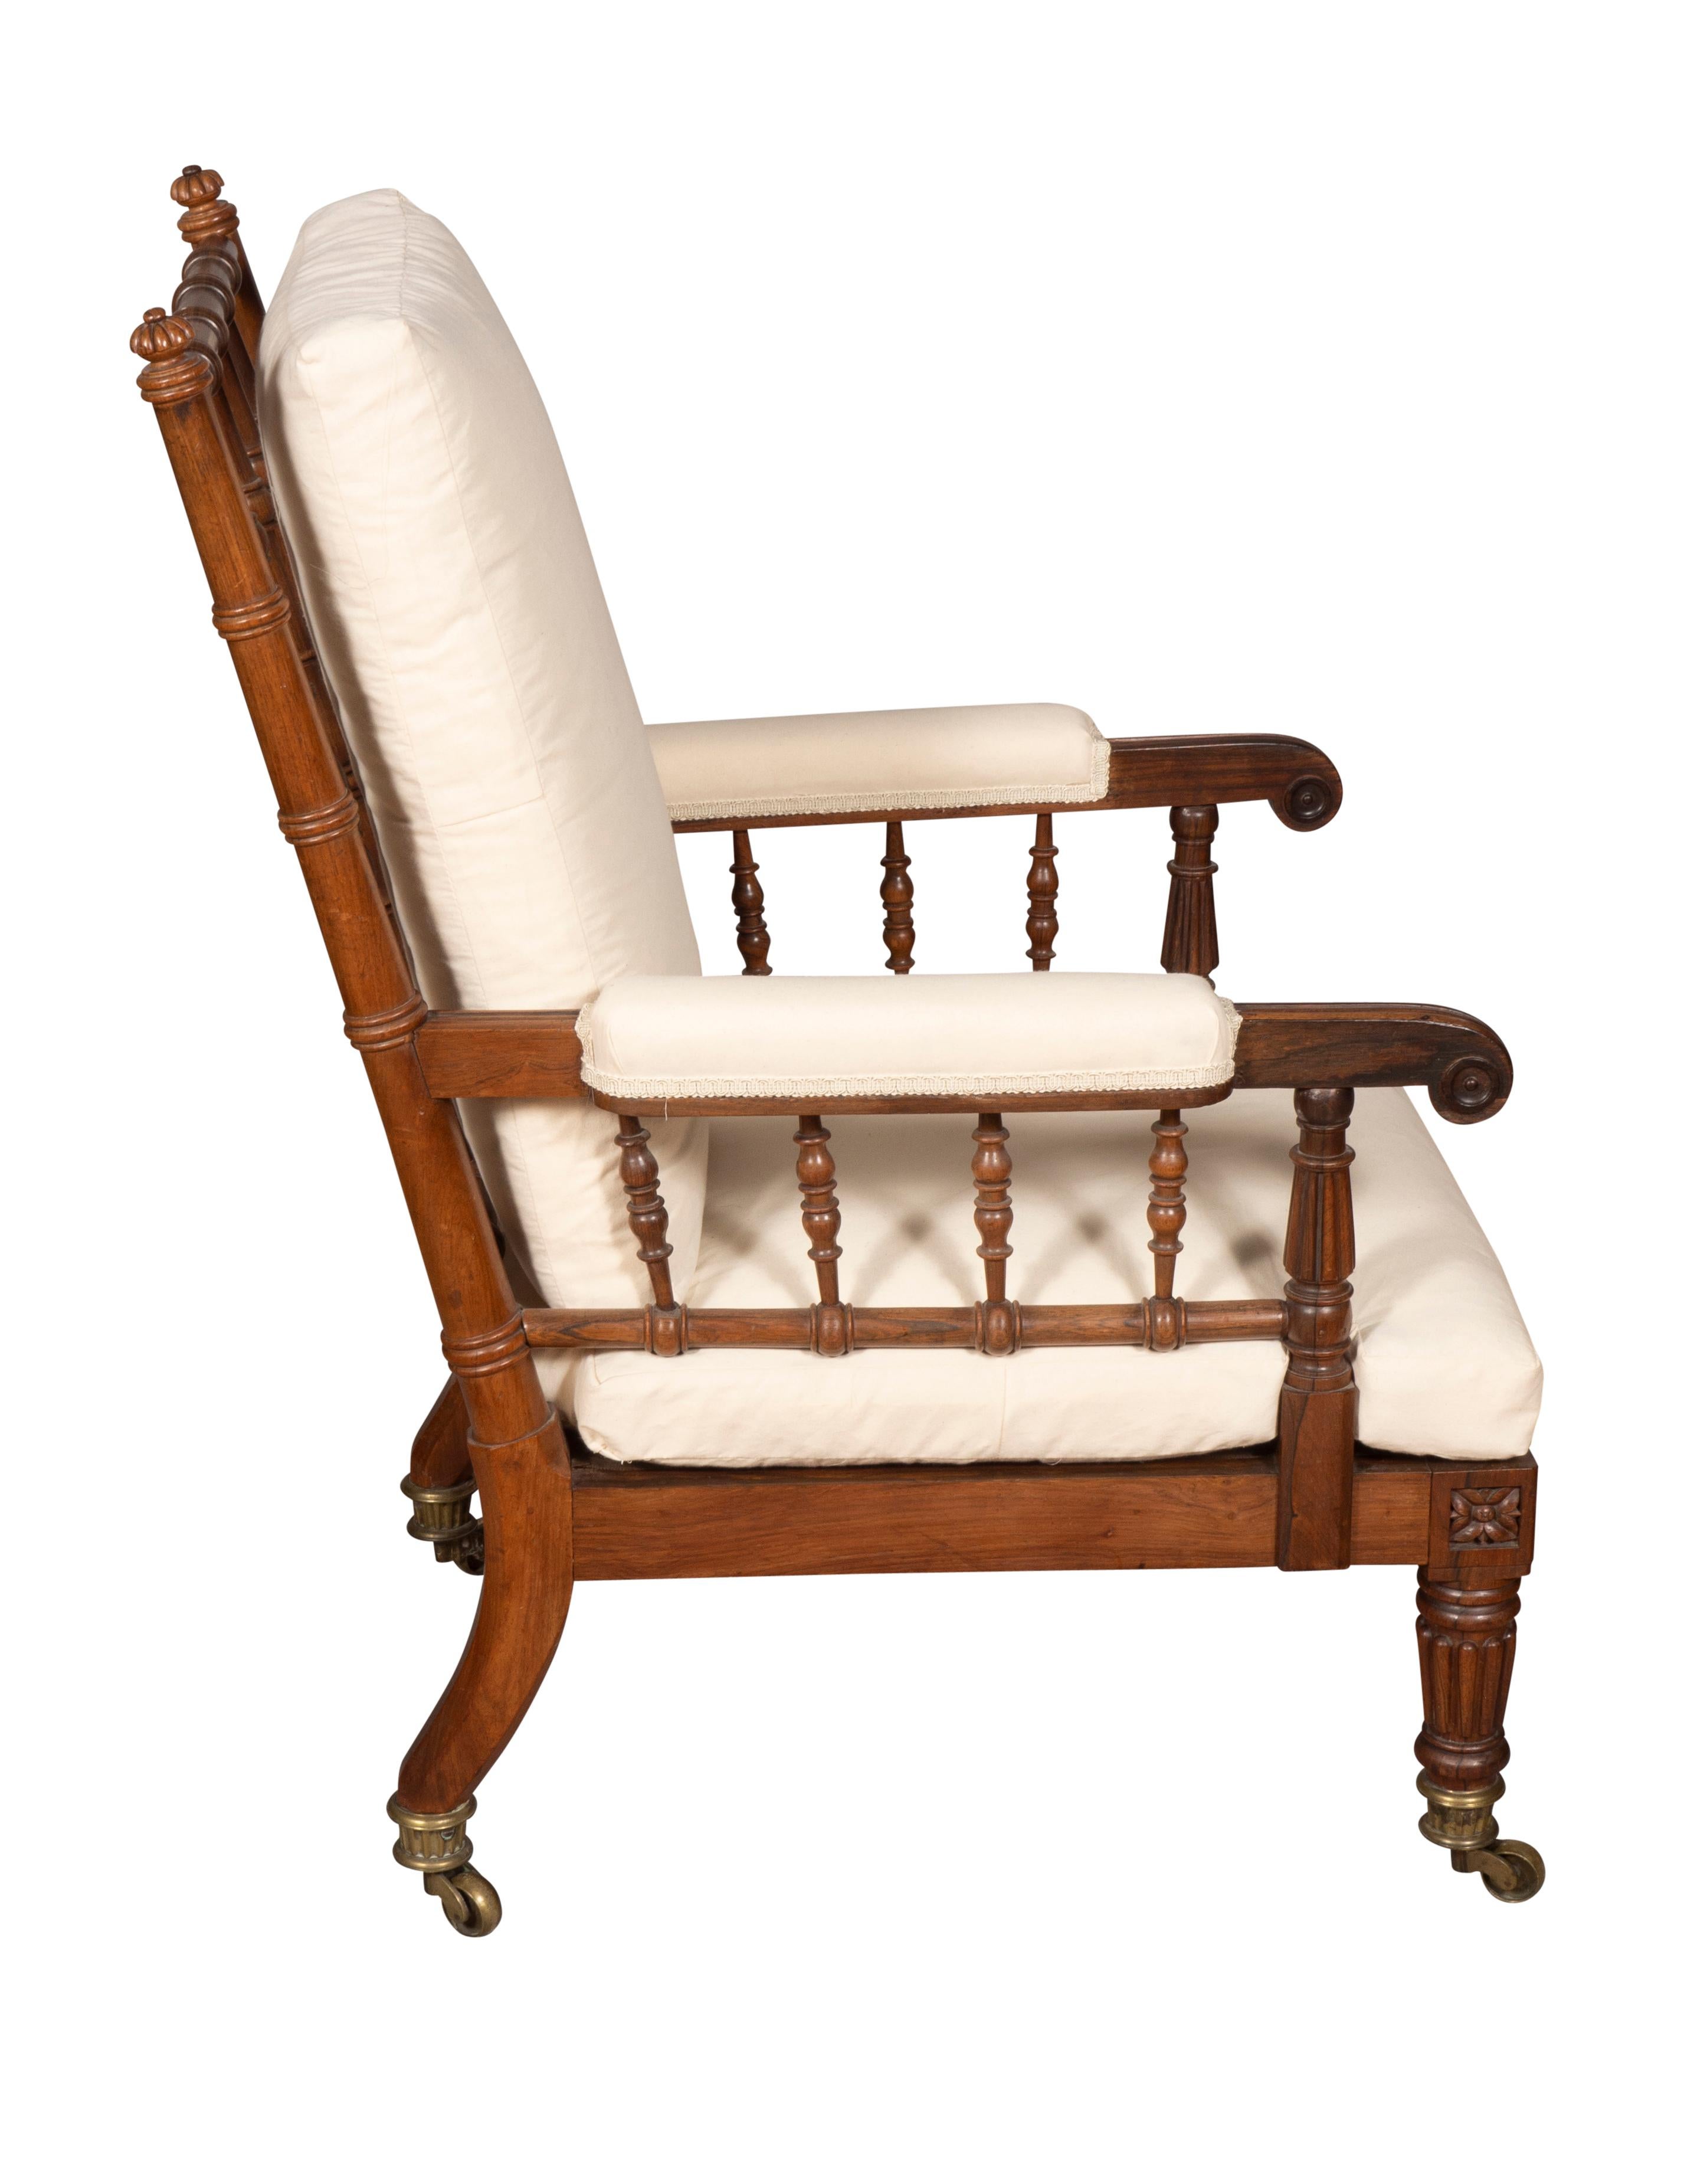 With rectangular back with spindles and loose muslin cushion, carved arms and loose cushion seat raised on circular reeded tapered legs and cup casters.